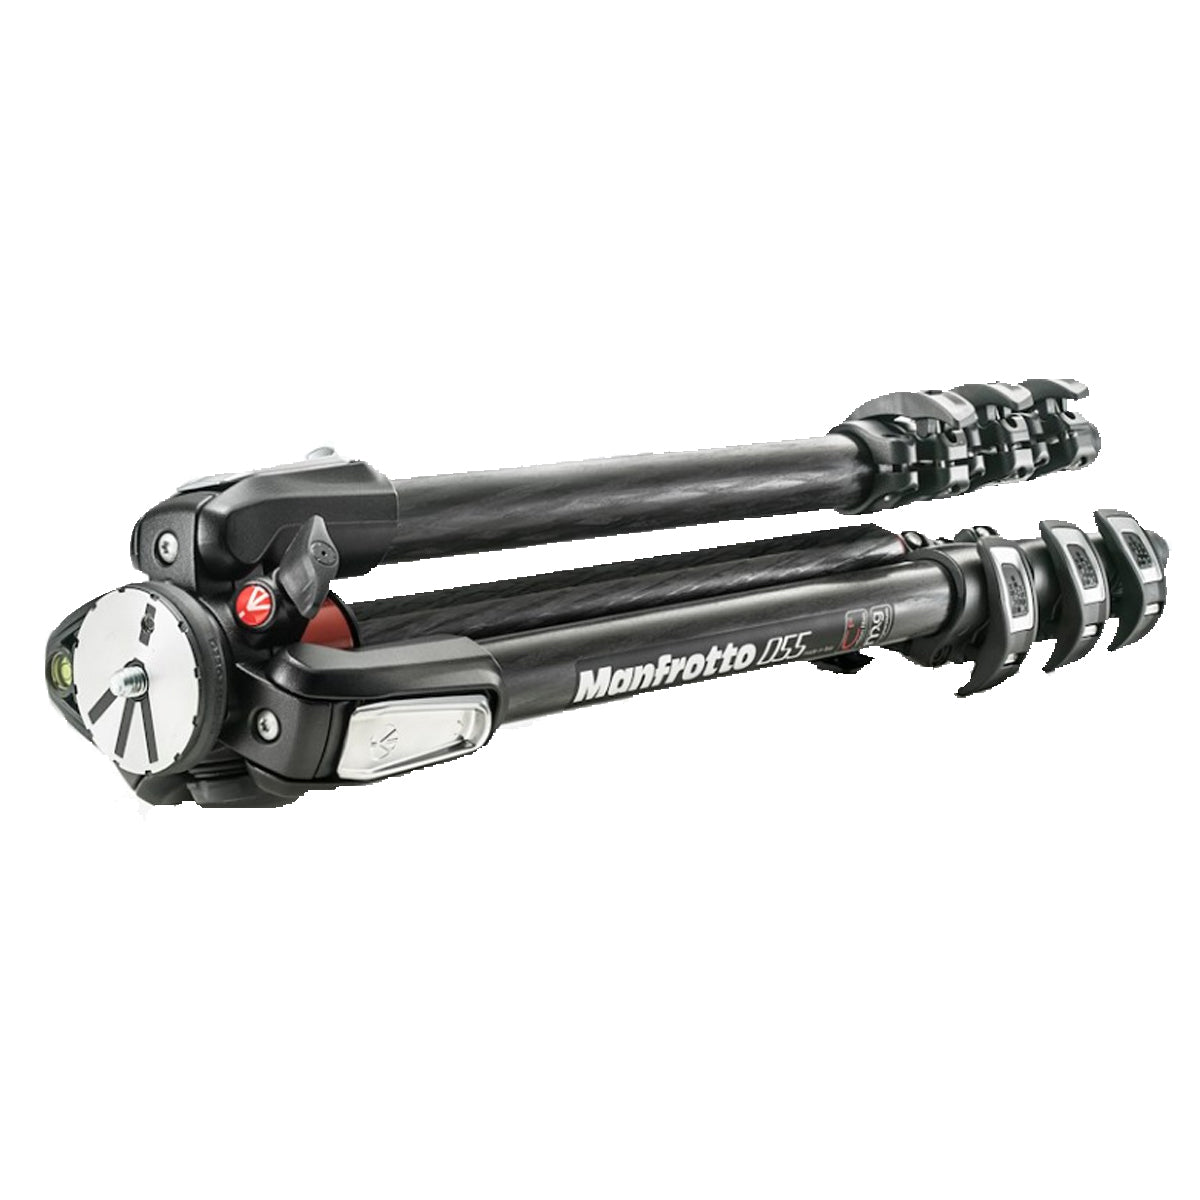 Manfrotto 055CXPRO4 Carbon Fiber Tripod in  by GOHUNT | Manfrotto - GOHUNT Shop